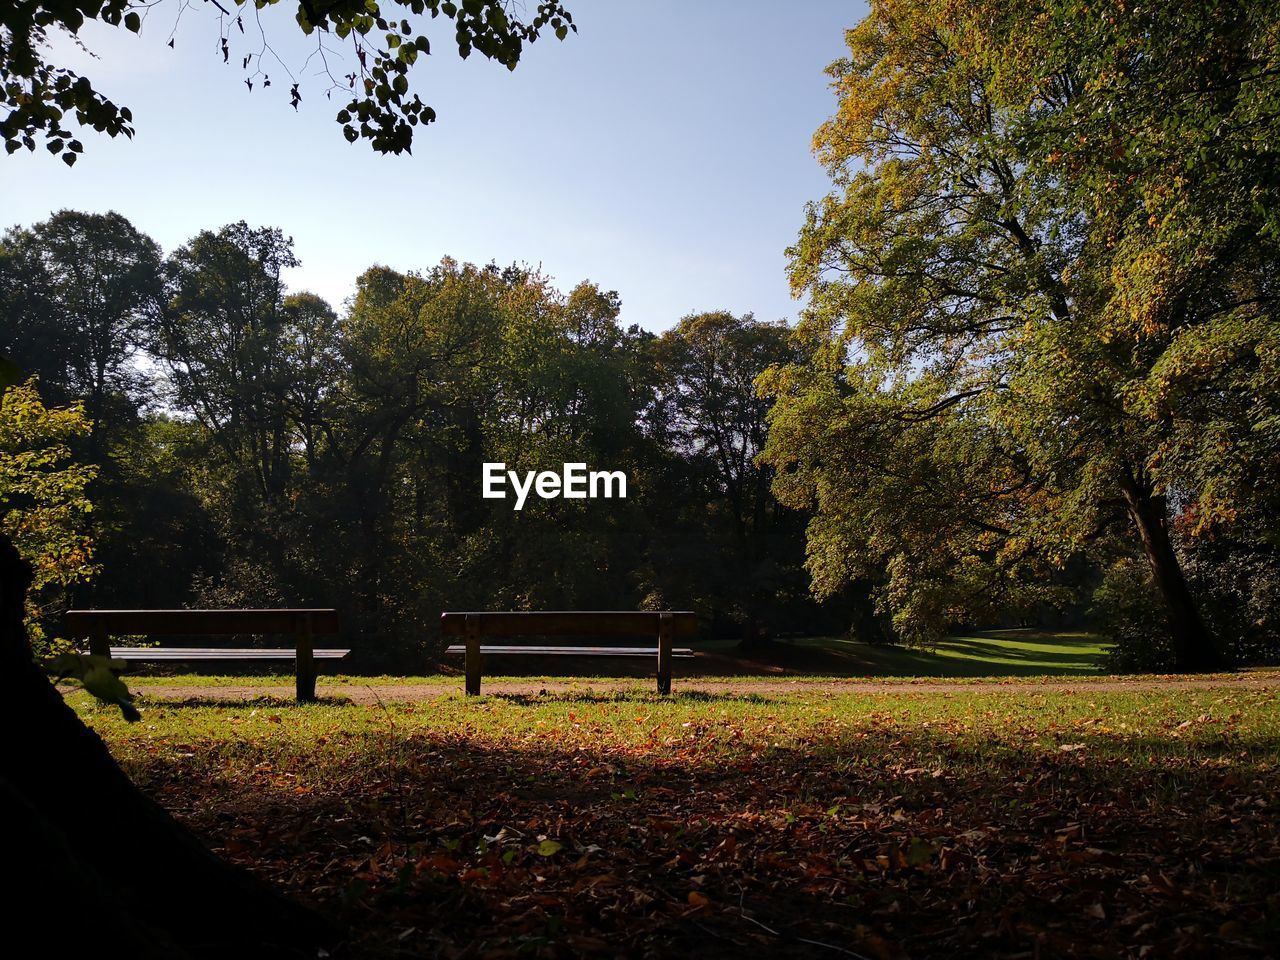 EMPTY PARK BENCH BY TREES AGAINST SKY IN AUTUMN